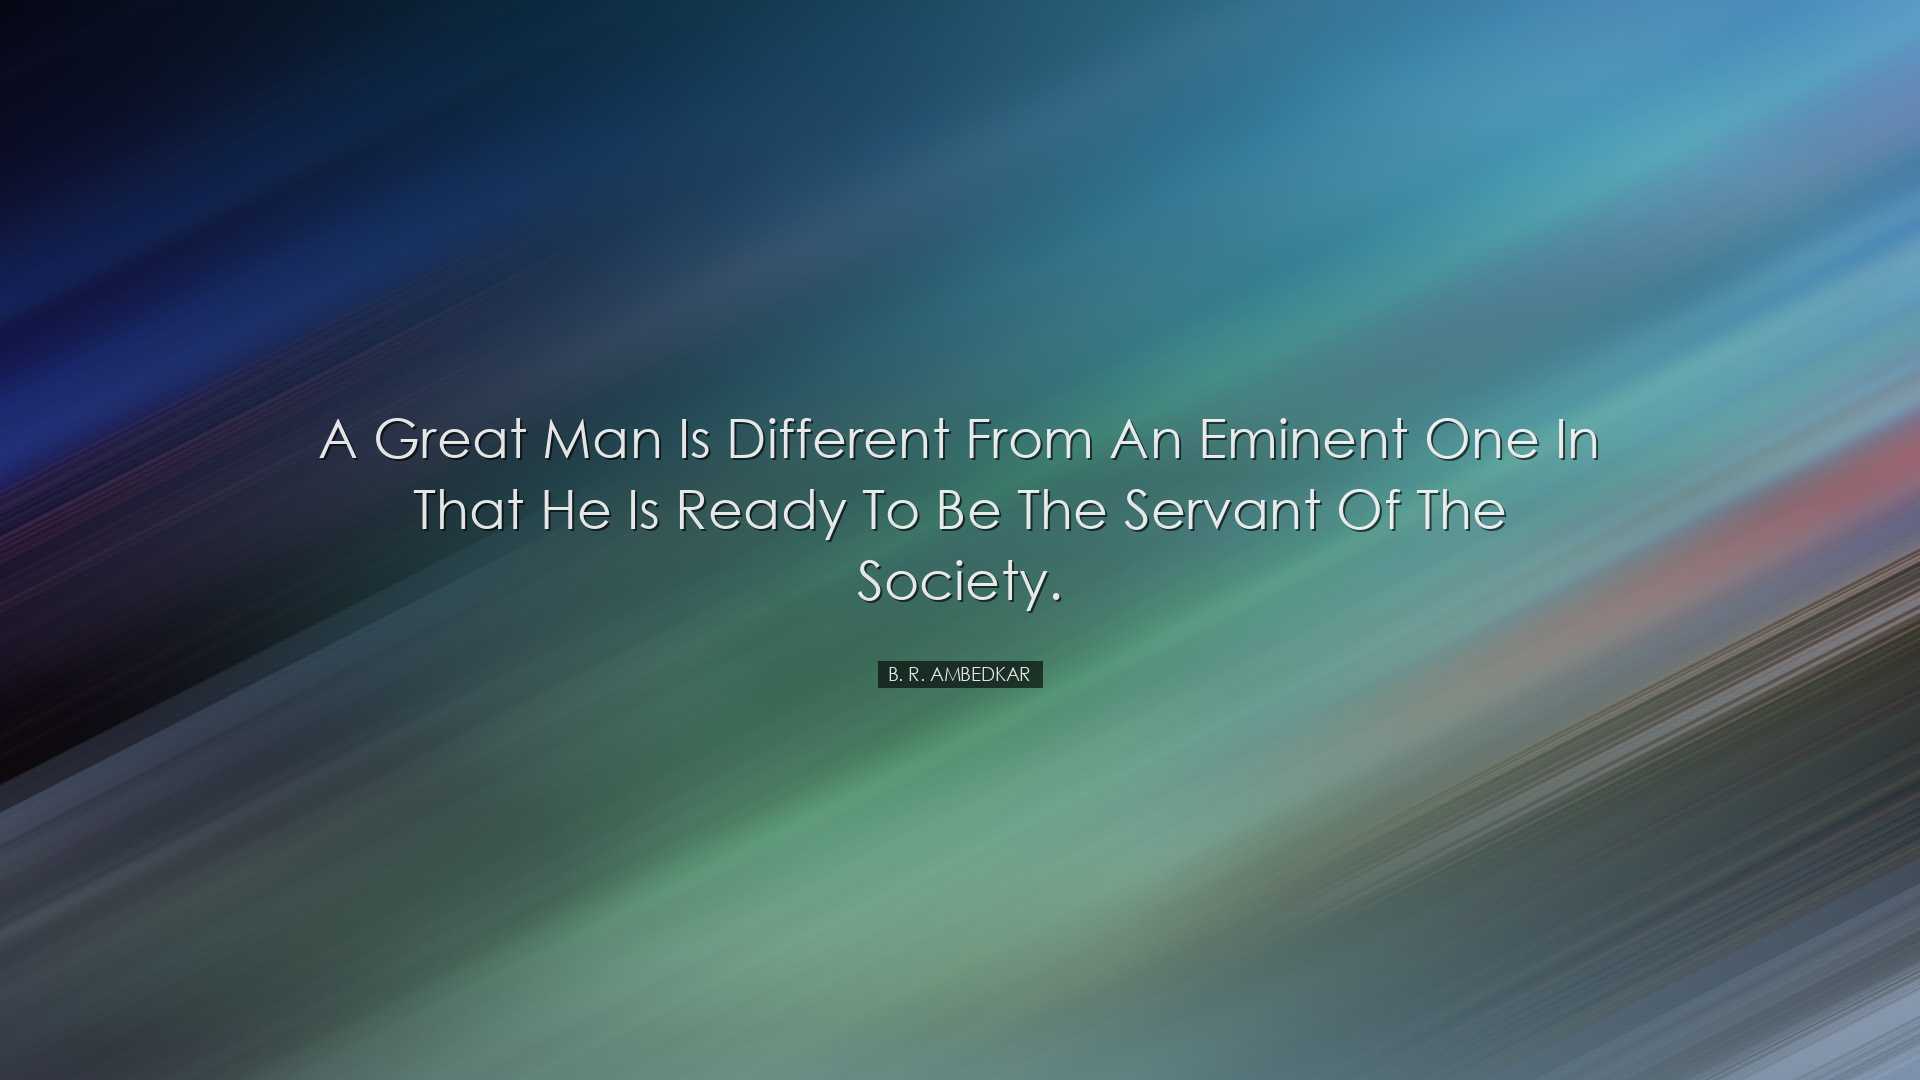 A great man is different from an eminent one in that he is ready t